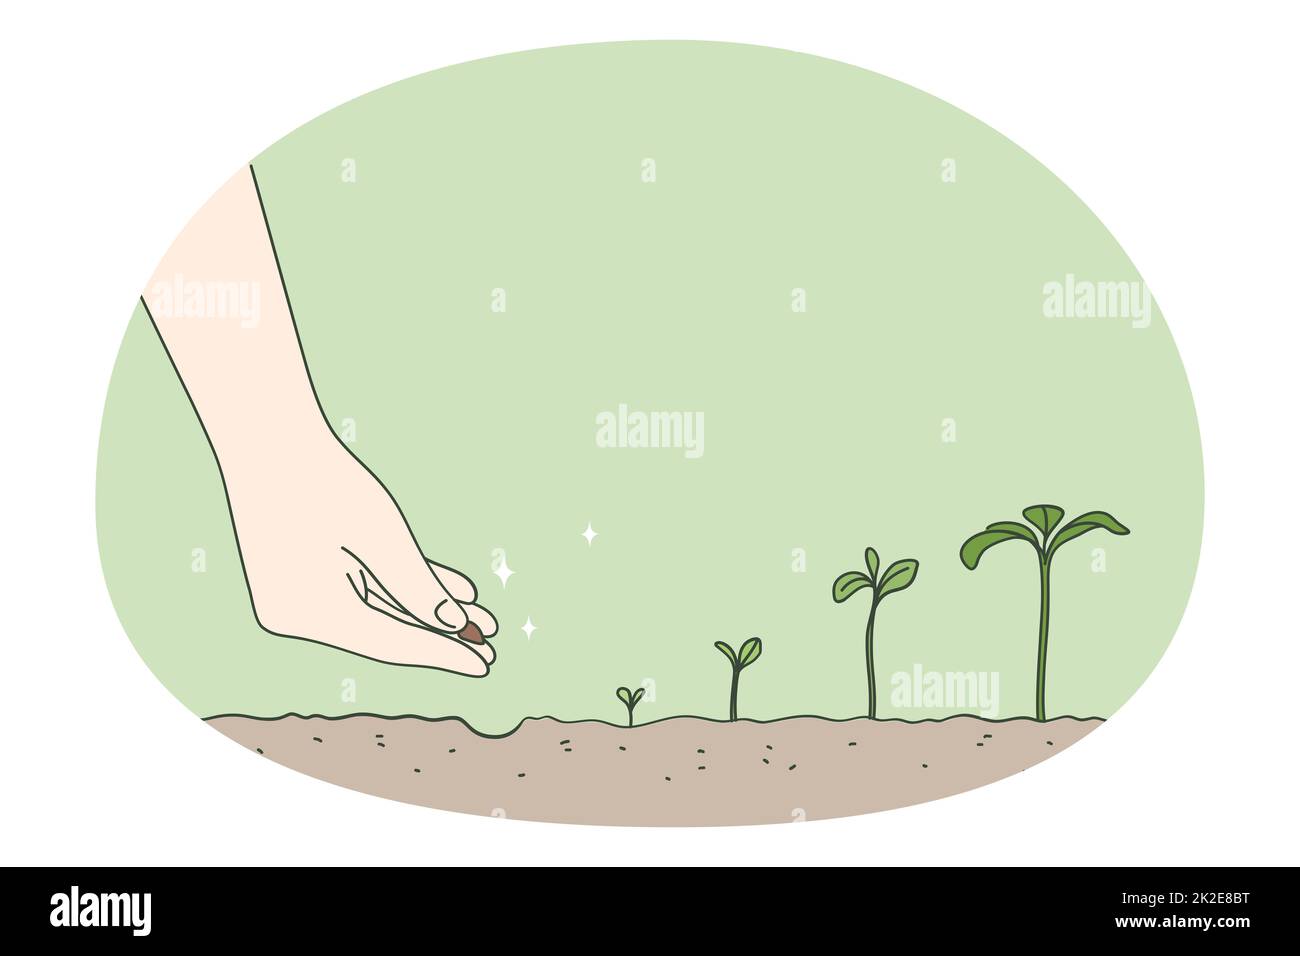 Person put seed in ground Stock Photo